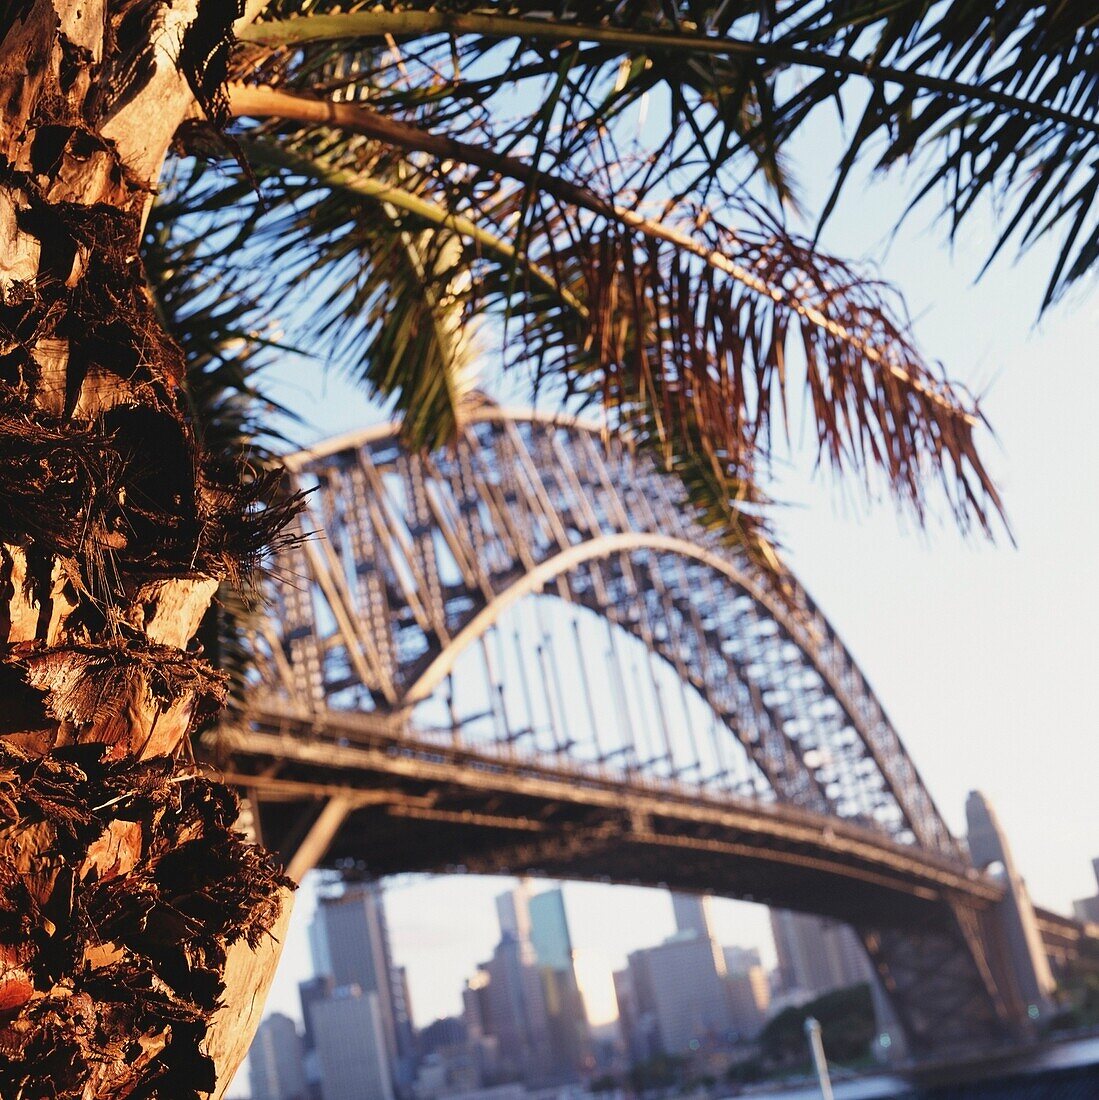 Bridge And City With Palm In The Foreground, Sydney